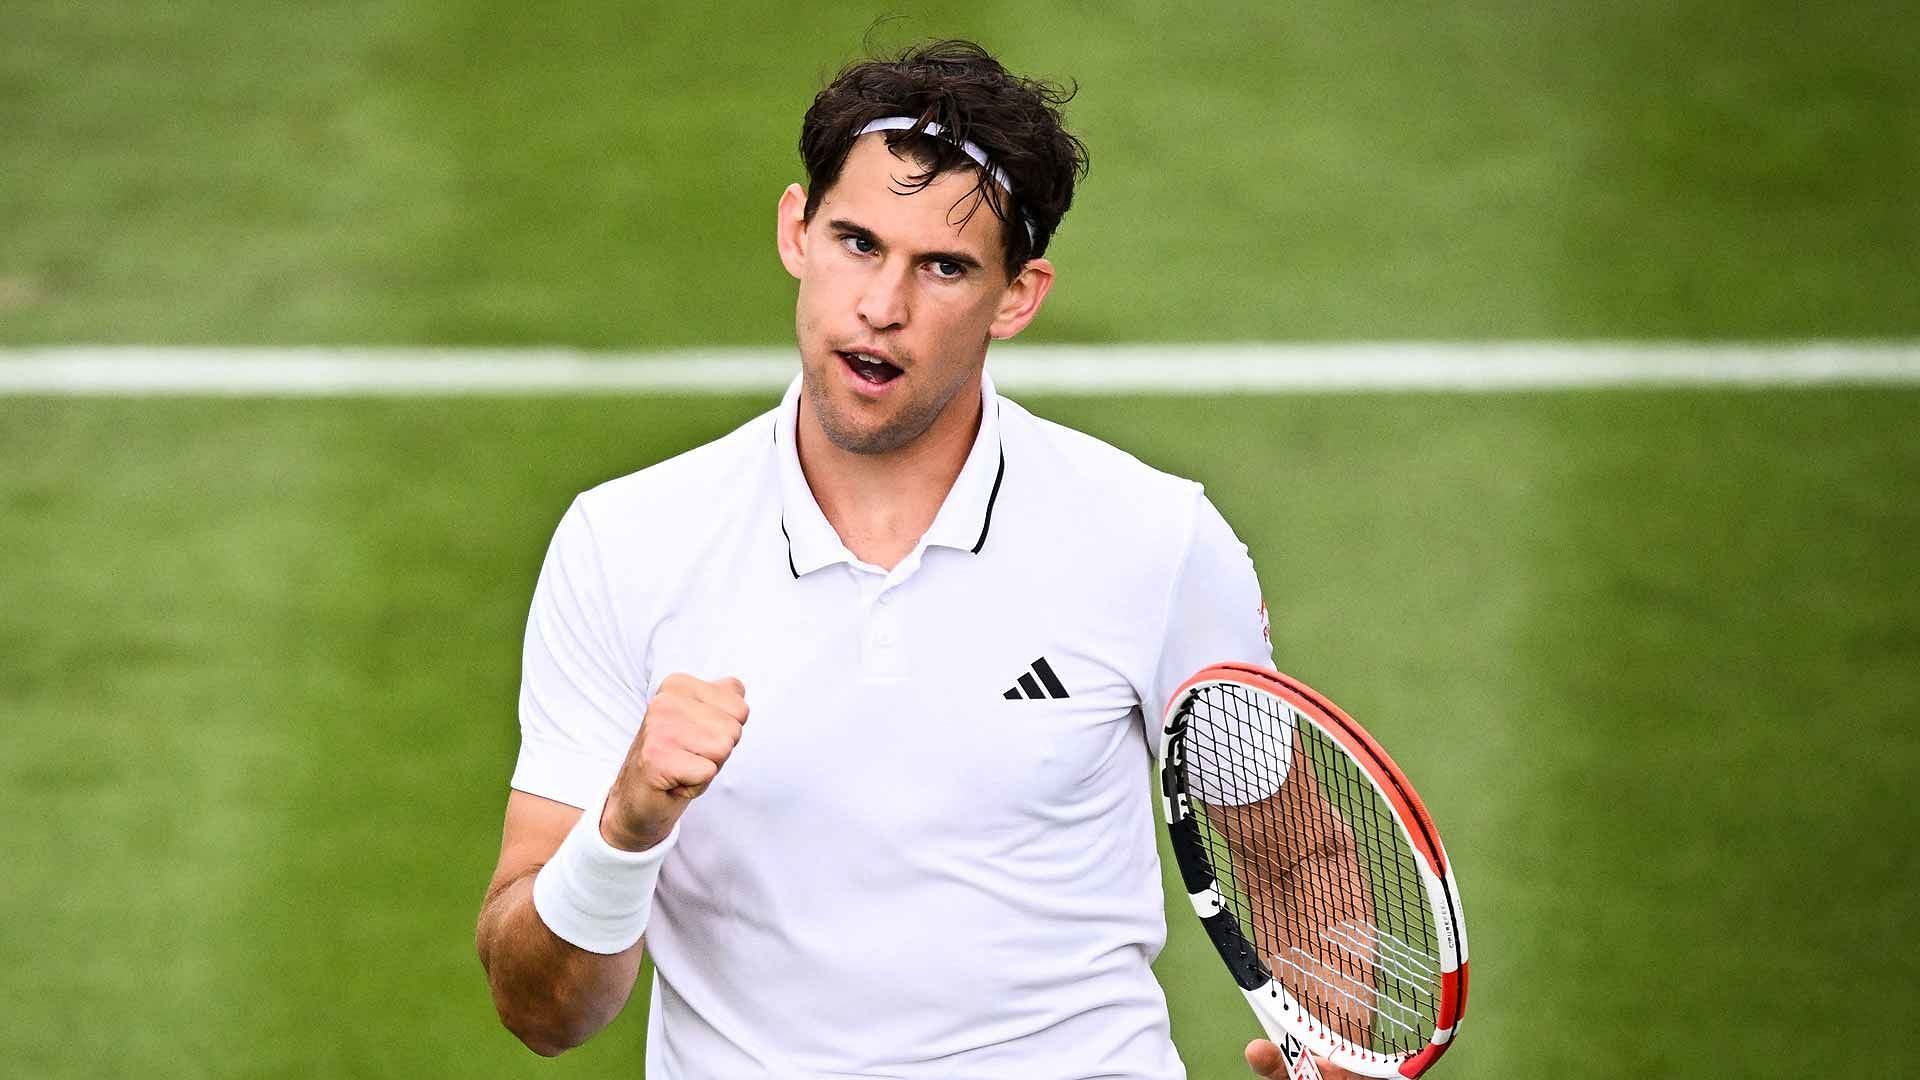 Thiem looked in good touch in his win over Muller